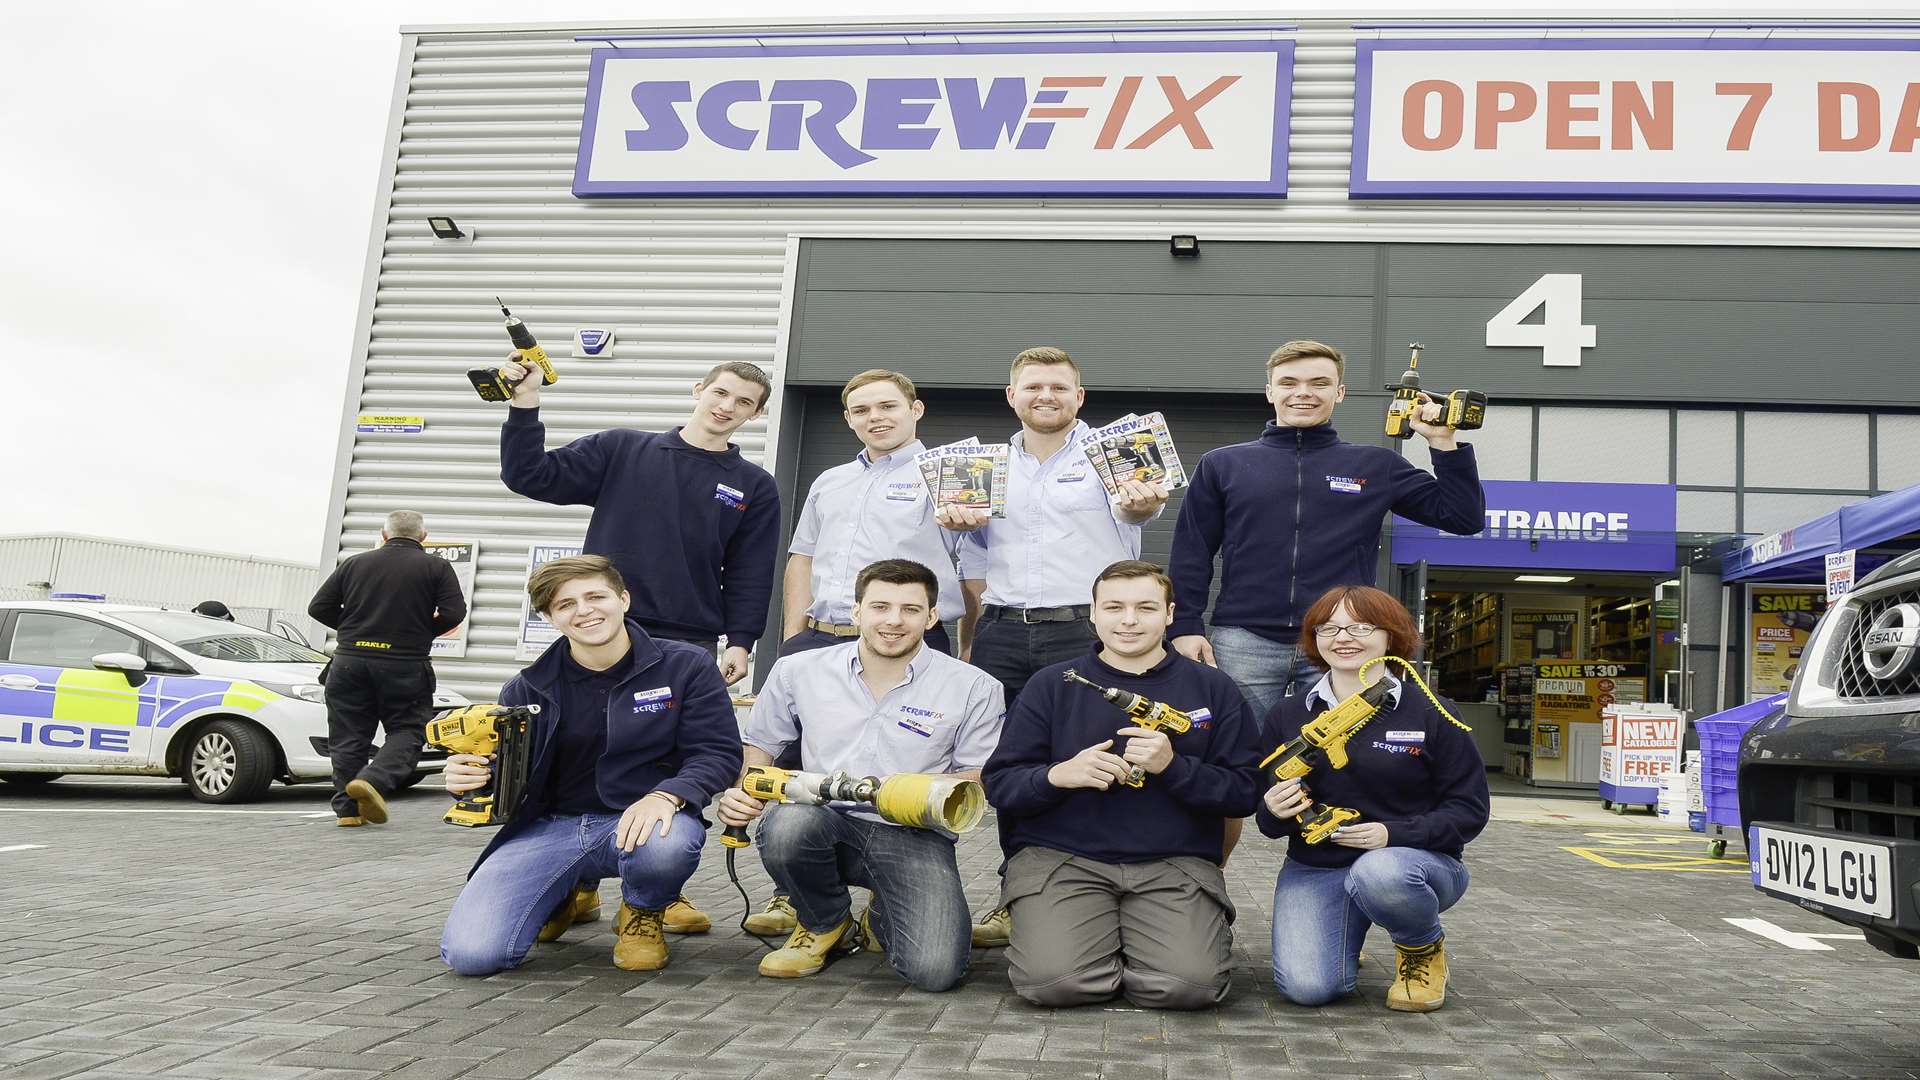 Staff from the new Screwfix store